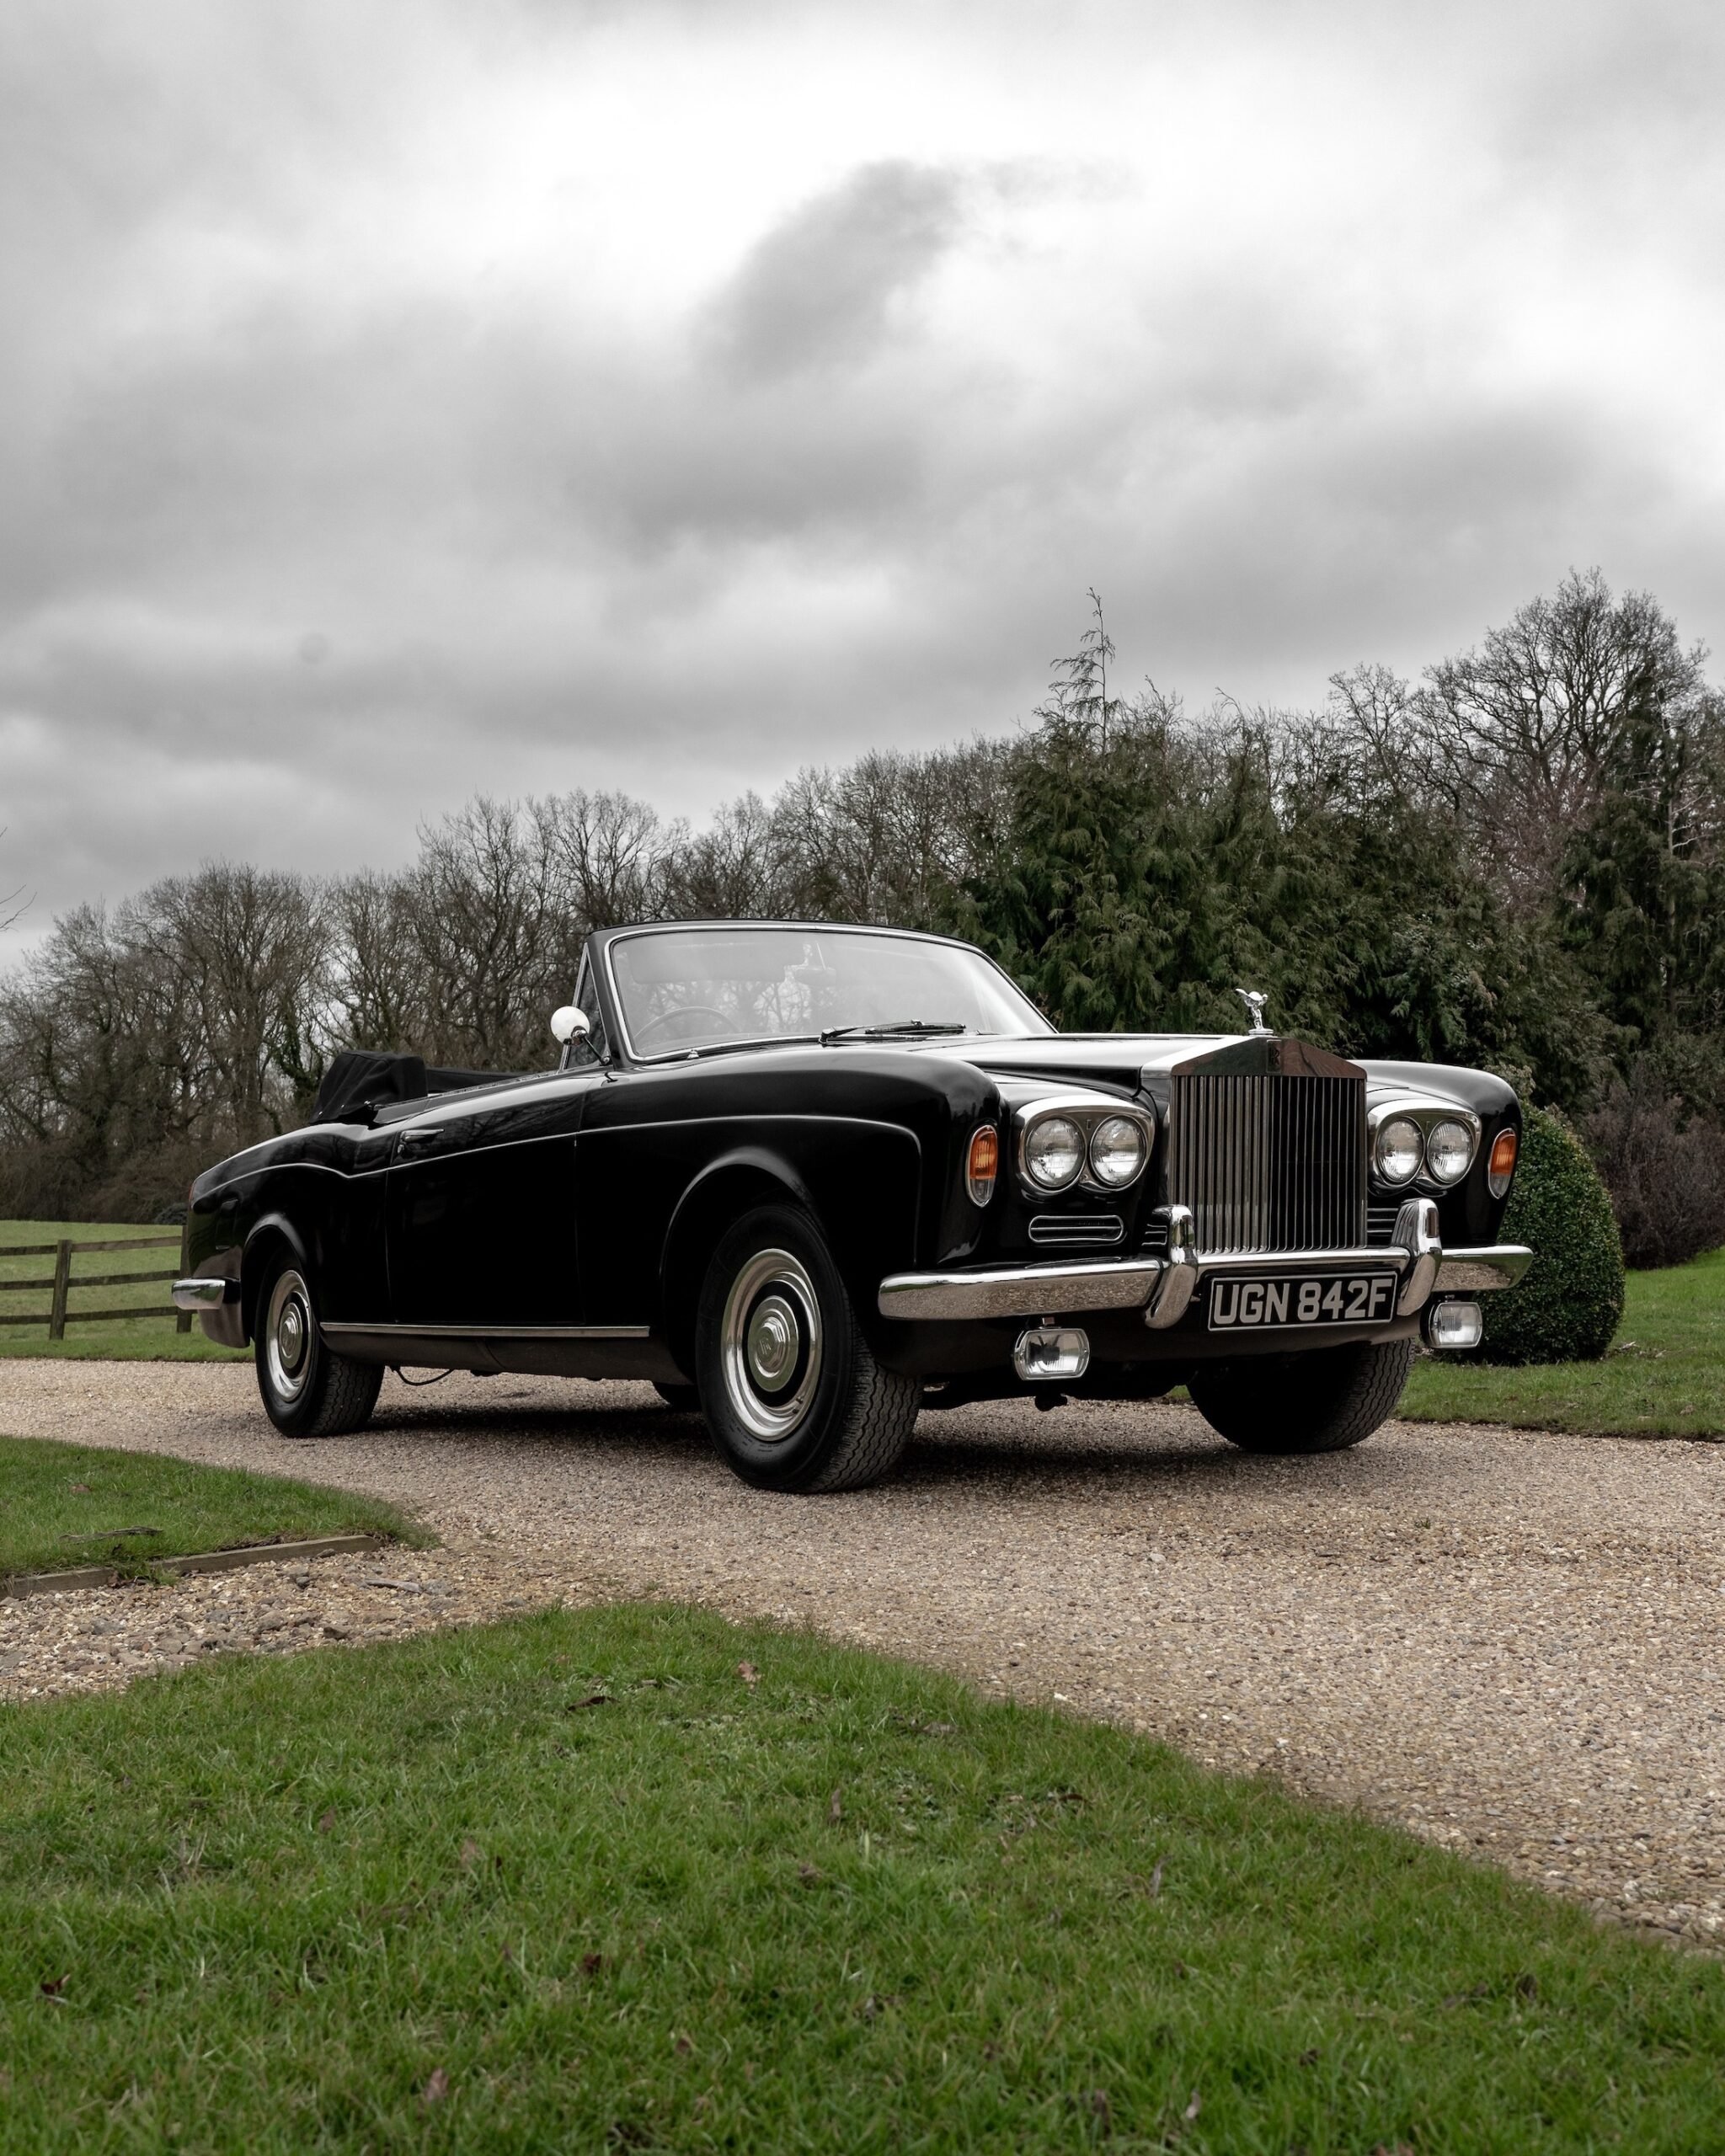 Pricey Pickup 1969 RollsRoyce Silver Shadow truck for sale  Autoblog